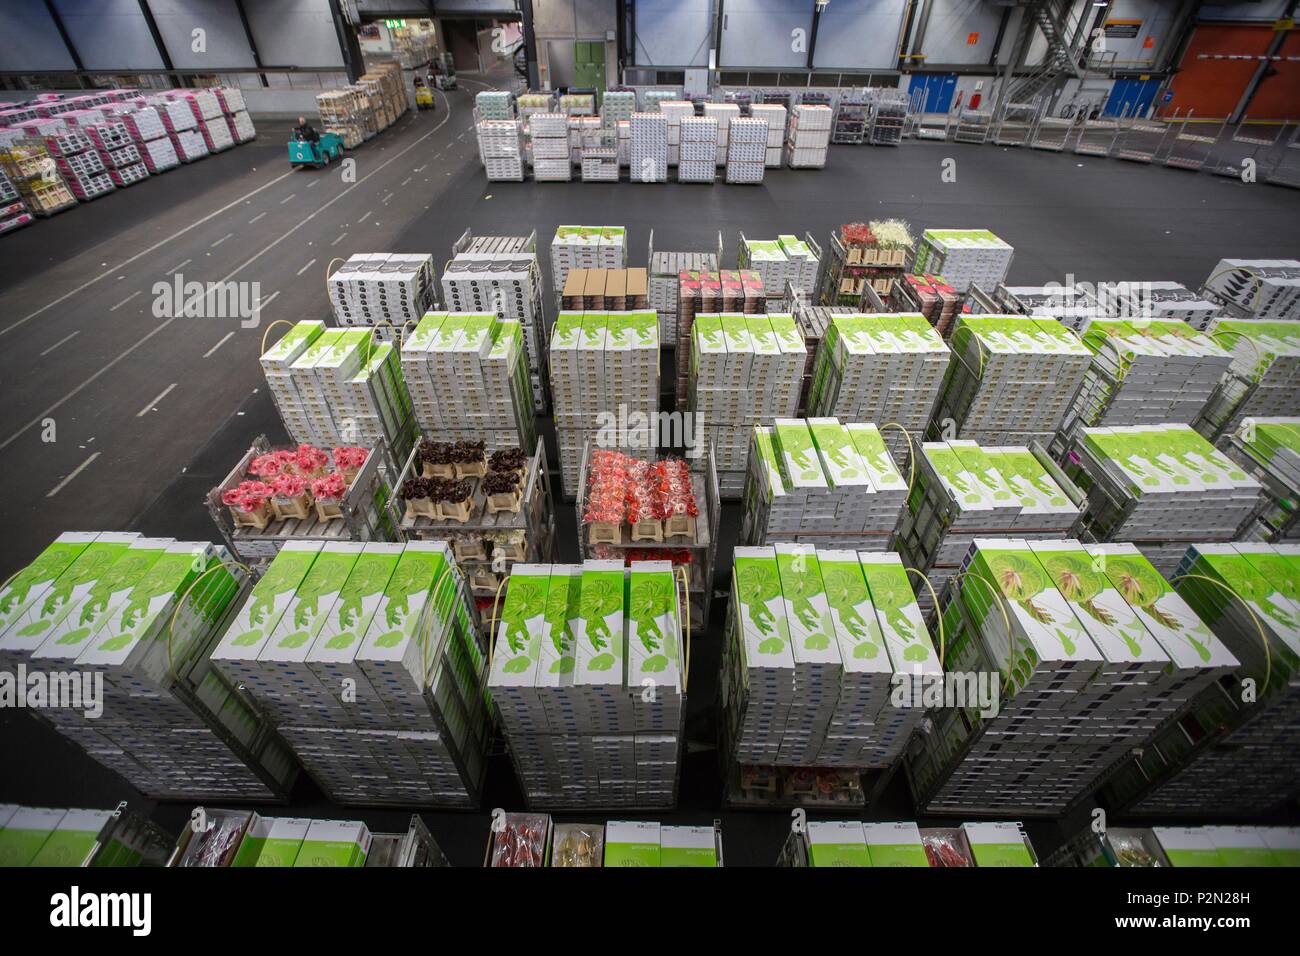 Netherlands, Northern Holland province, Aalsmeer, largest flower market in the world (Bloemenveiling), flower sales at auction and flower market Stock Photo